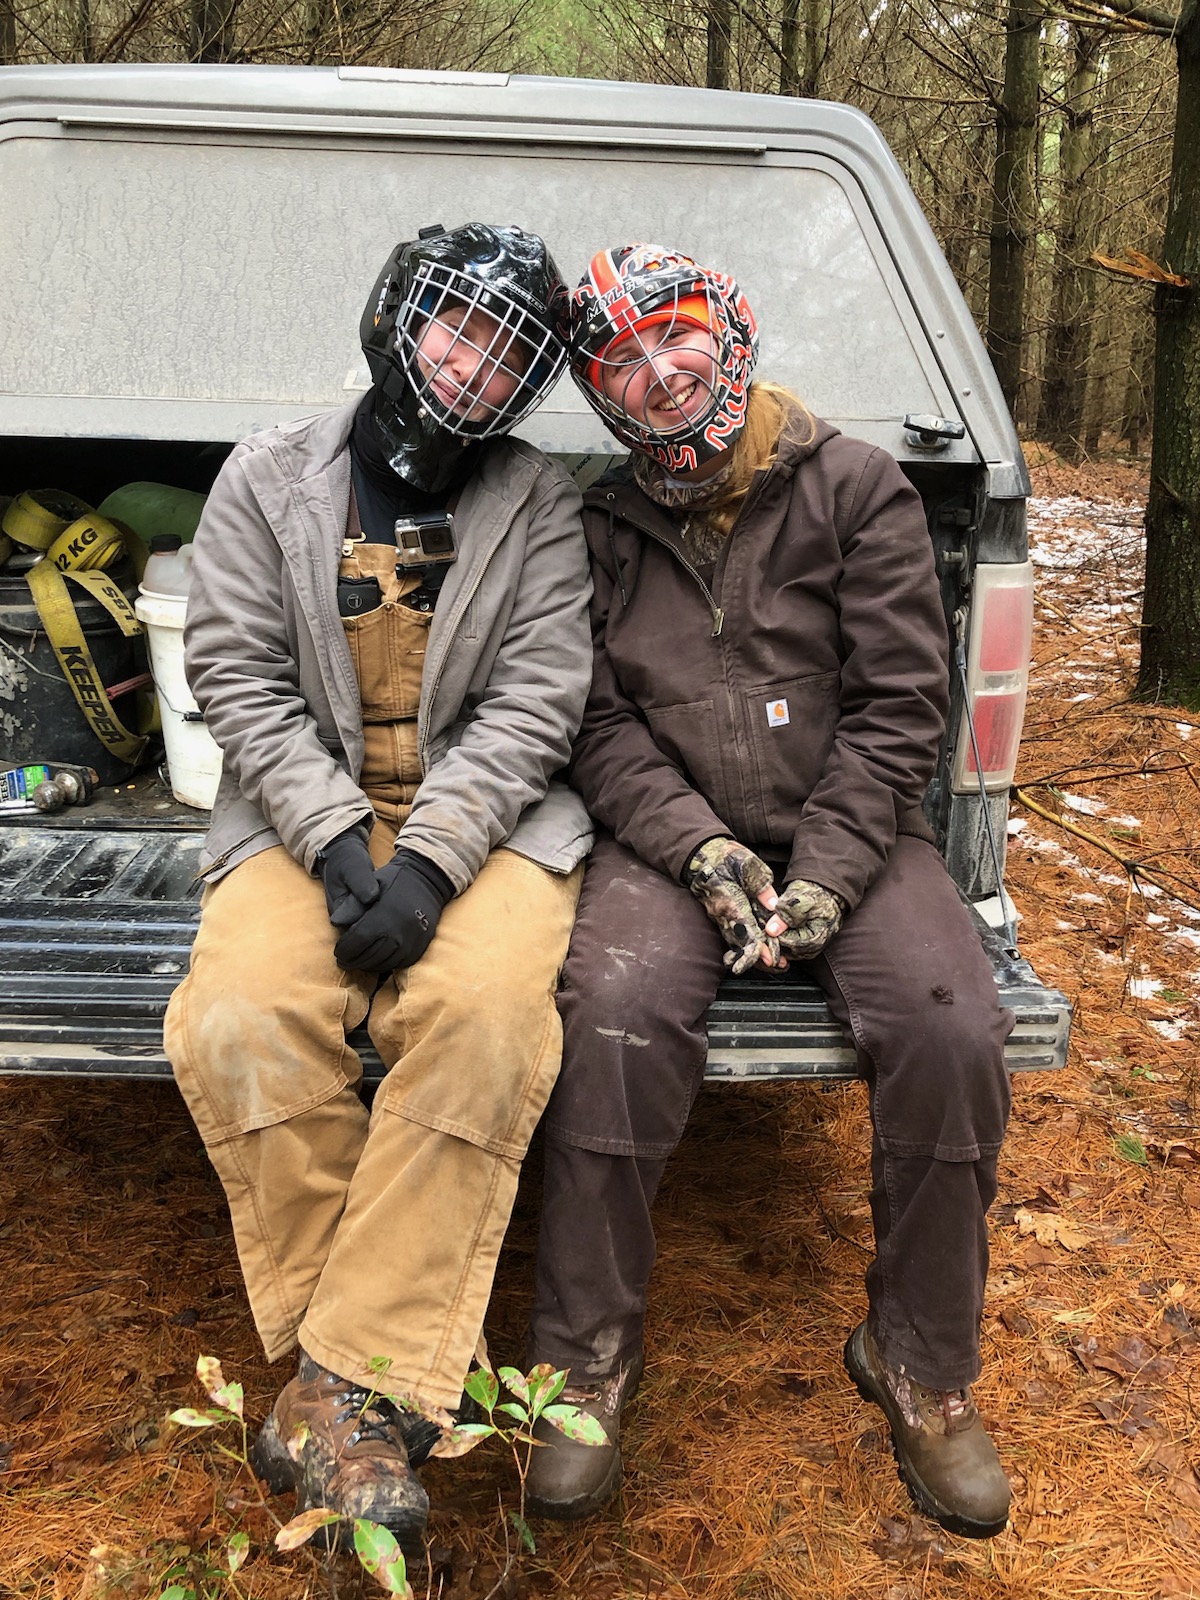 2 crew members sitting on the tail gate in field gear and goalie helmets